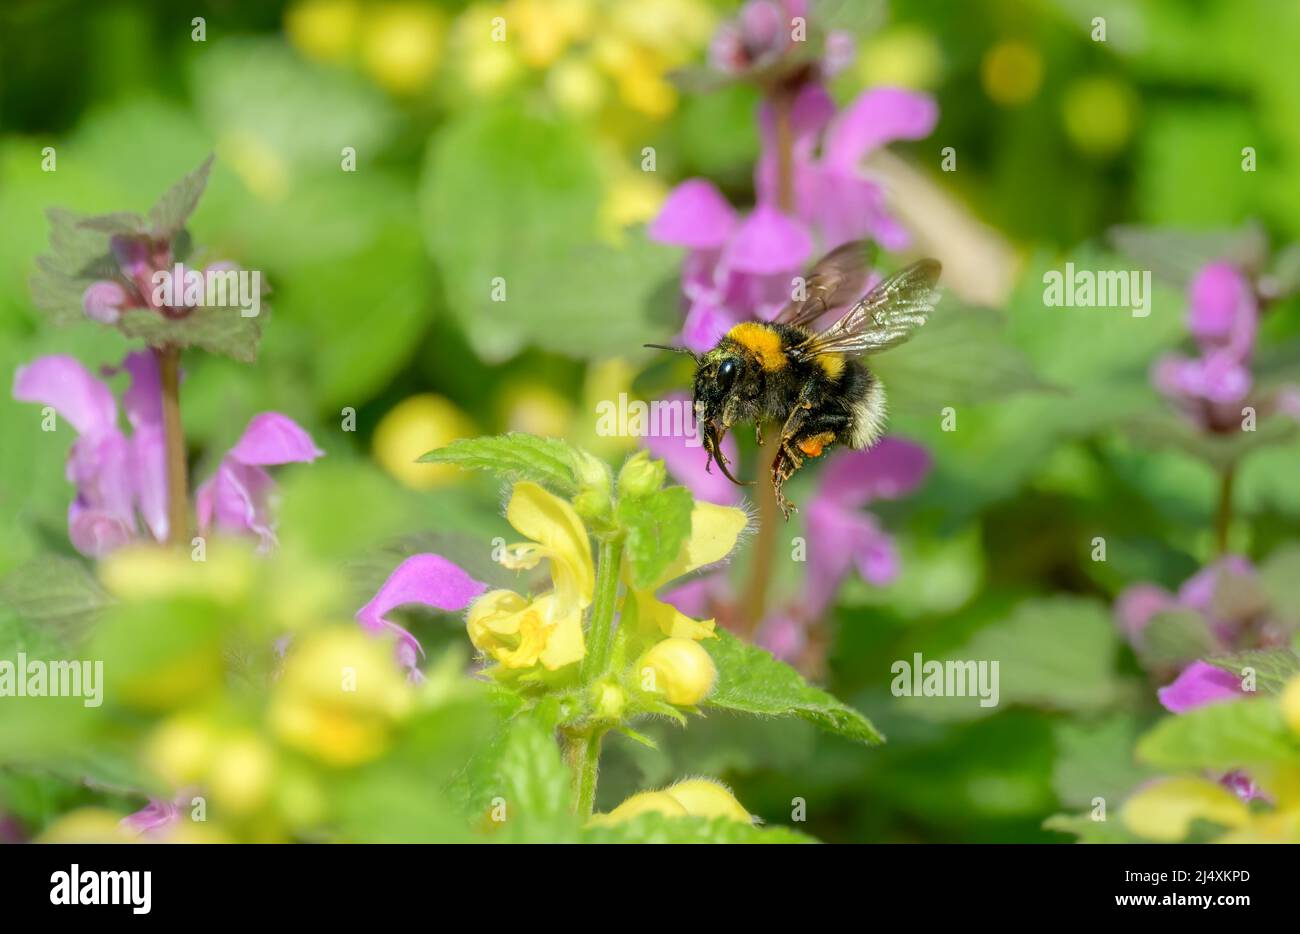 Garden bumblebee, Bombus hortorum, in flight showing its long tongue for soaking up nectar of flowers purple dead-nettle and yellow archangel, Lamium Stock Photo